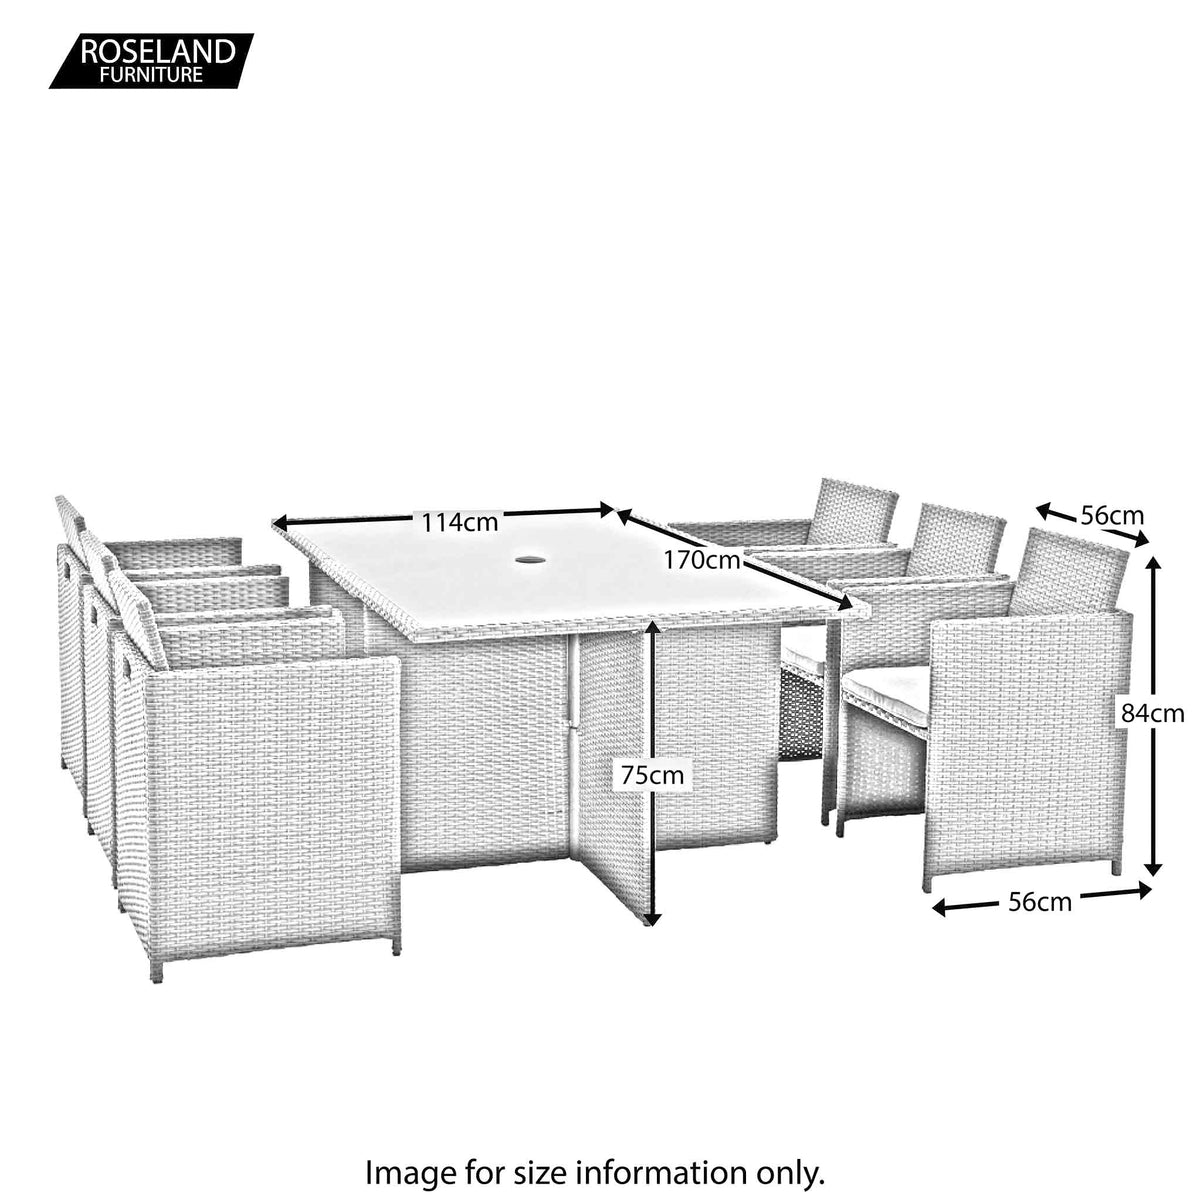 Vada Grey 6 Seat Rattan Cube Set - Size Guide